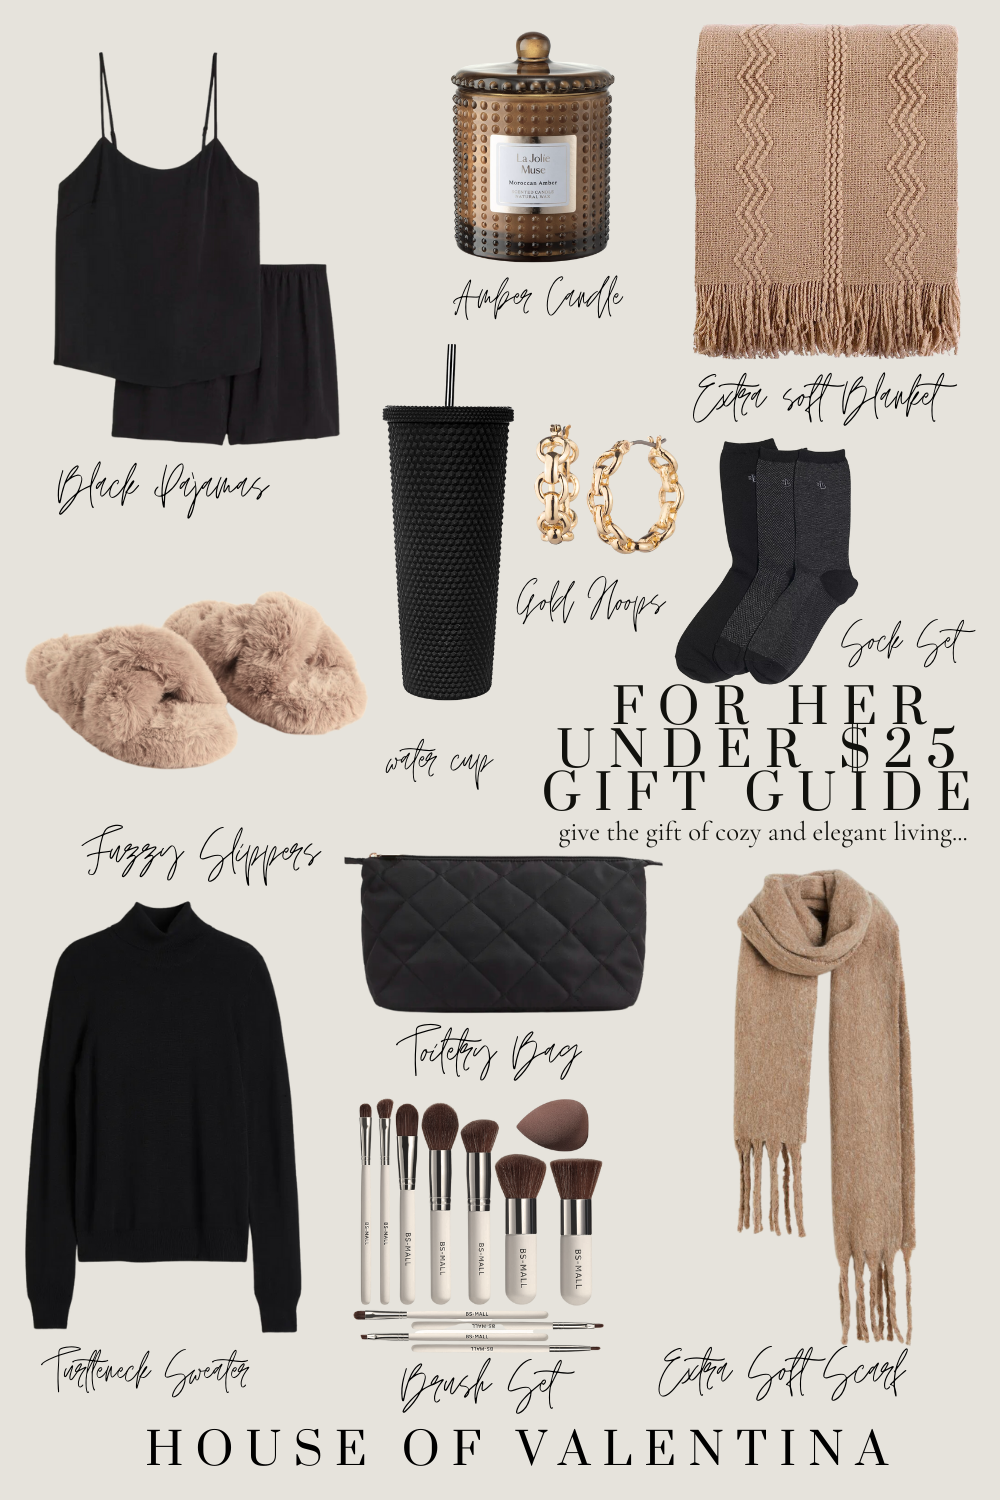 Gift Guide for Her under $25